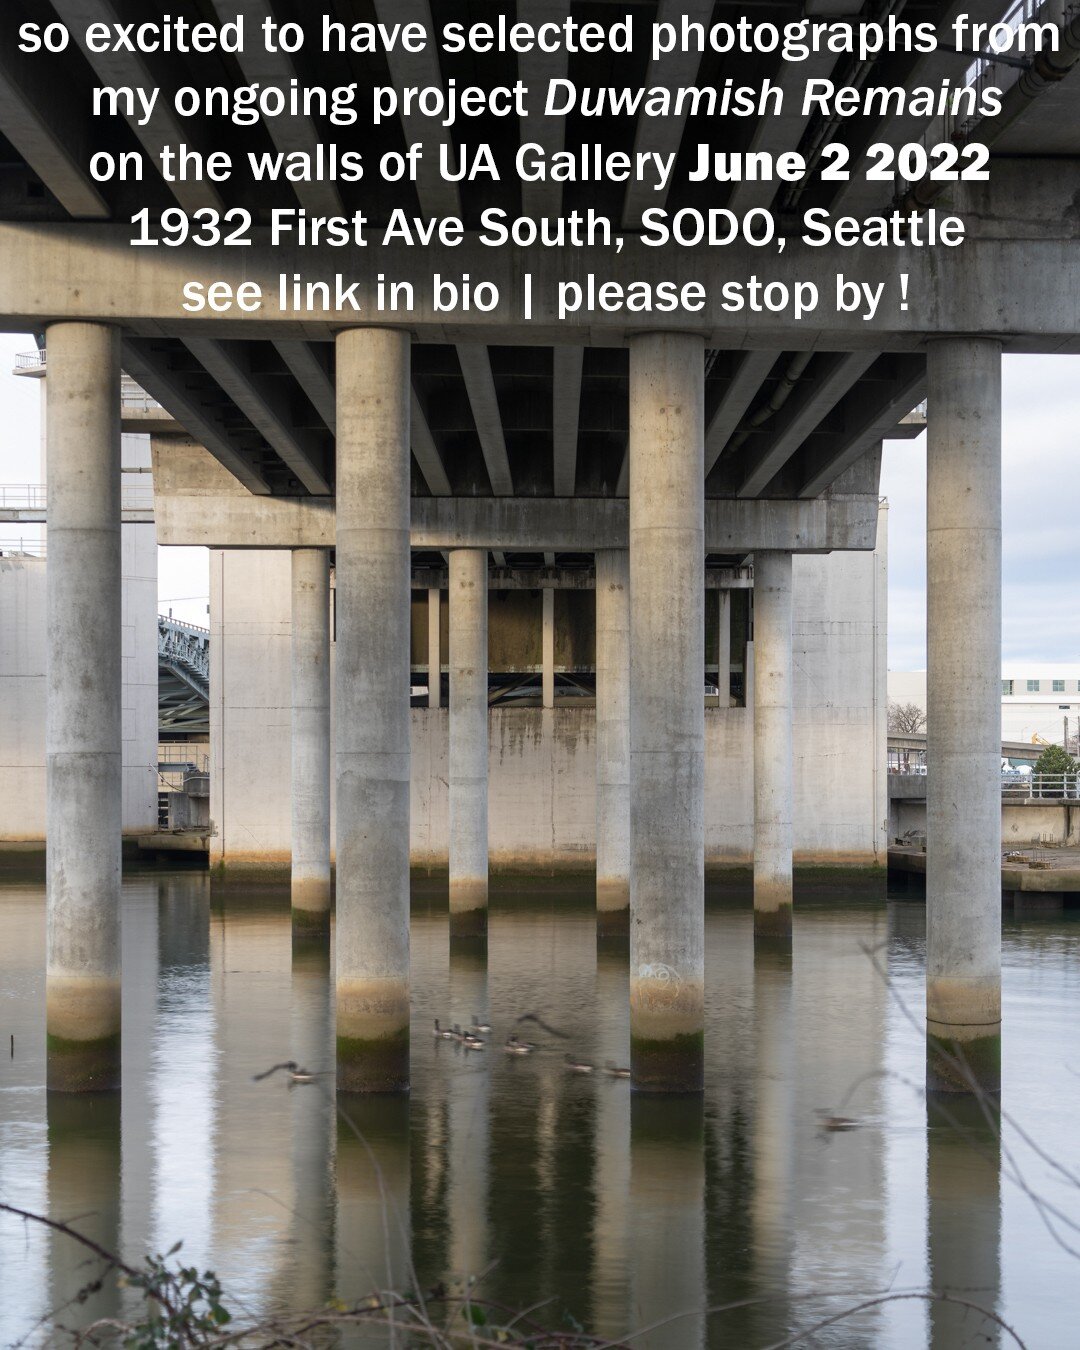 Duwamish Remains
UA Gallery 
June 2 2022 
1932 First Ave South, SODO, Seattle
.
@duwamishremains @urbanadd_architects #duwamishremains #duwamishriver #duwamishterritory #duwamishwatershed #duwamish #duwamishmeanders #duwamishwaterway